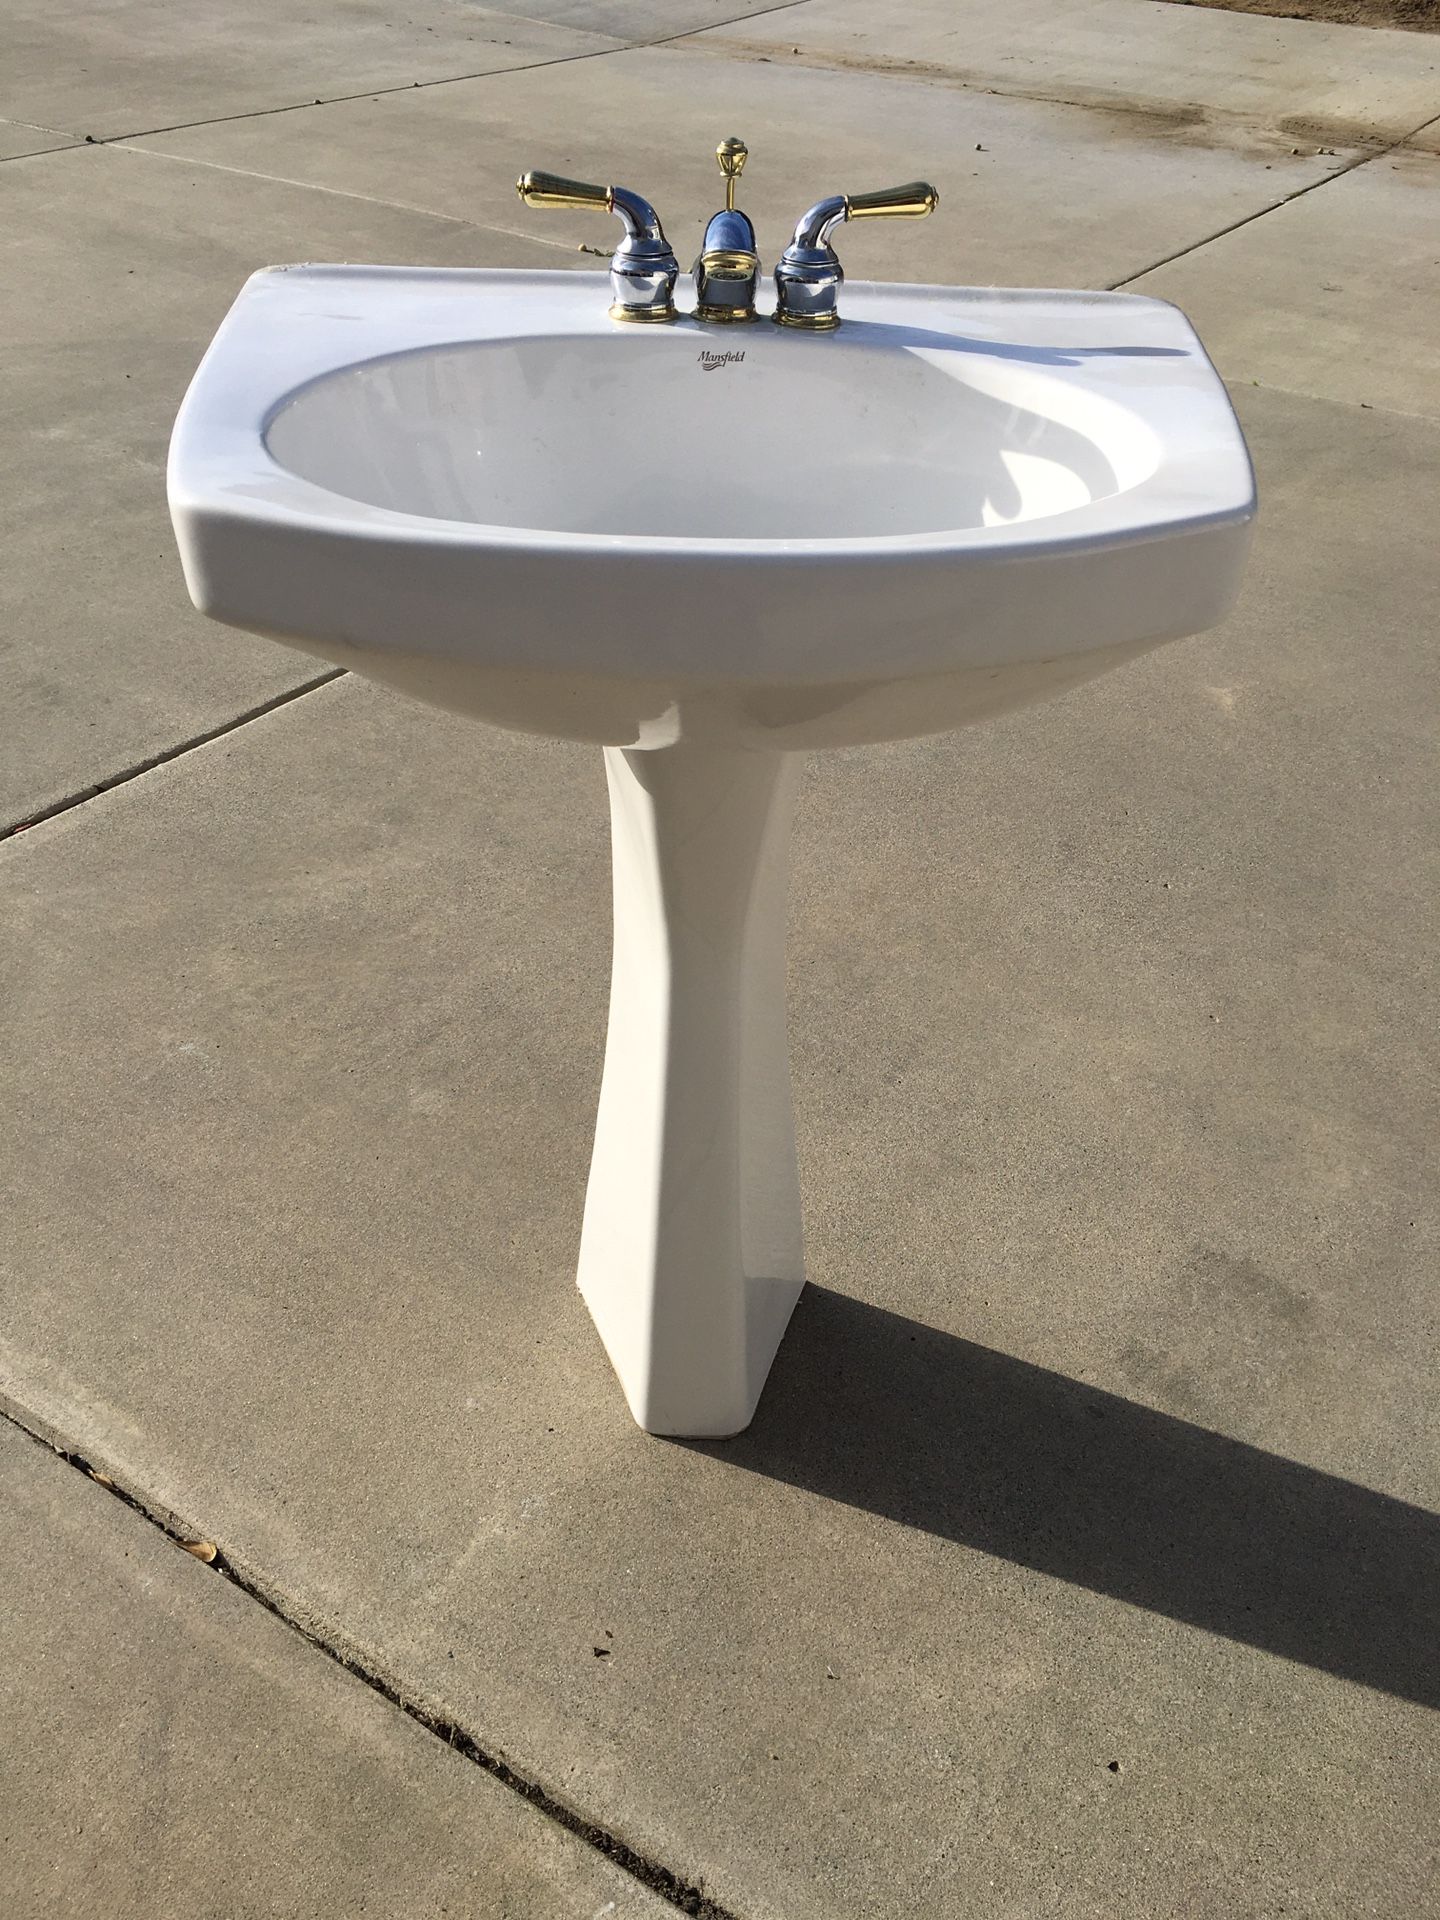 Pedestal sink with Faucet